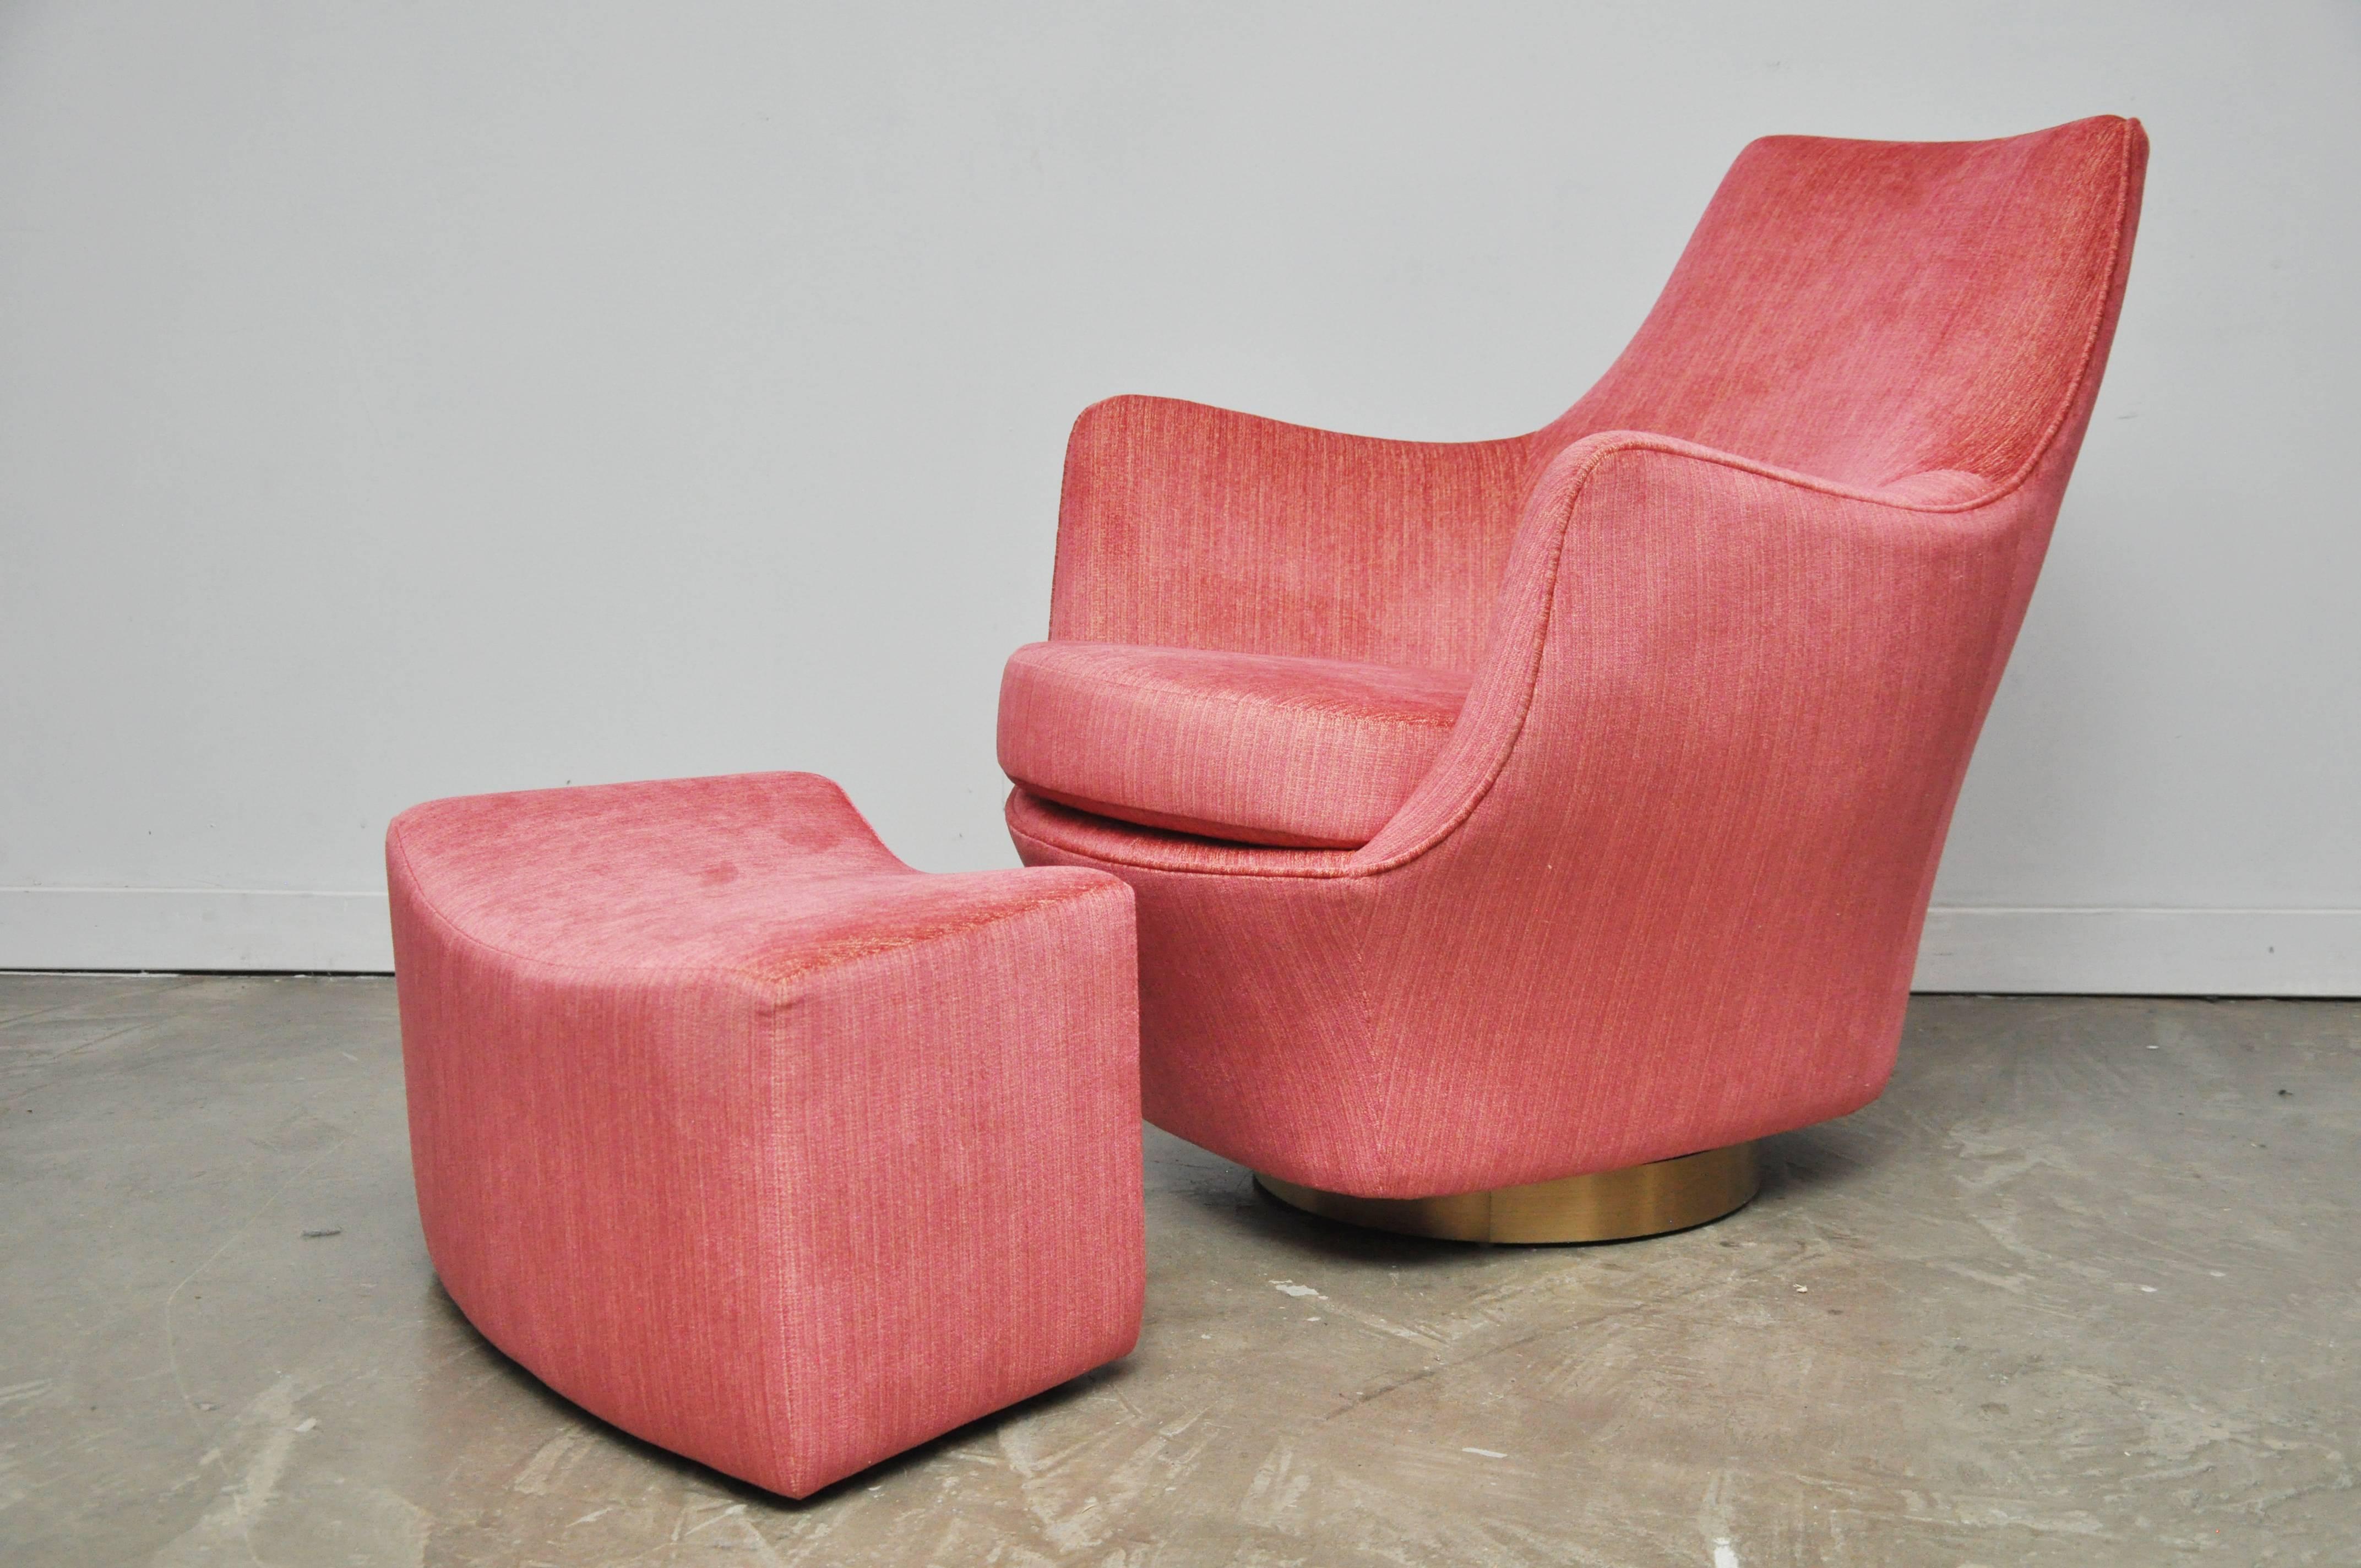 Pod chair by Milo Baughman with ottoman. Fully restored and reupholstered in new pink fabric over brushed bronze swivel base.